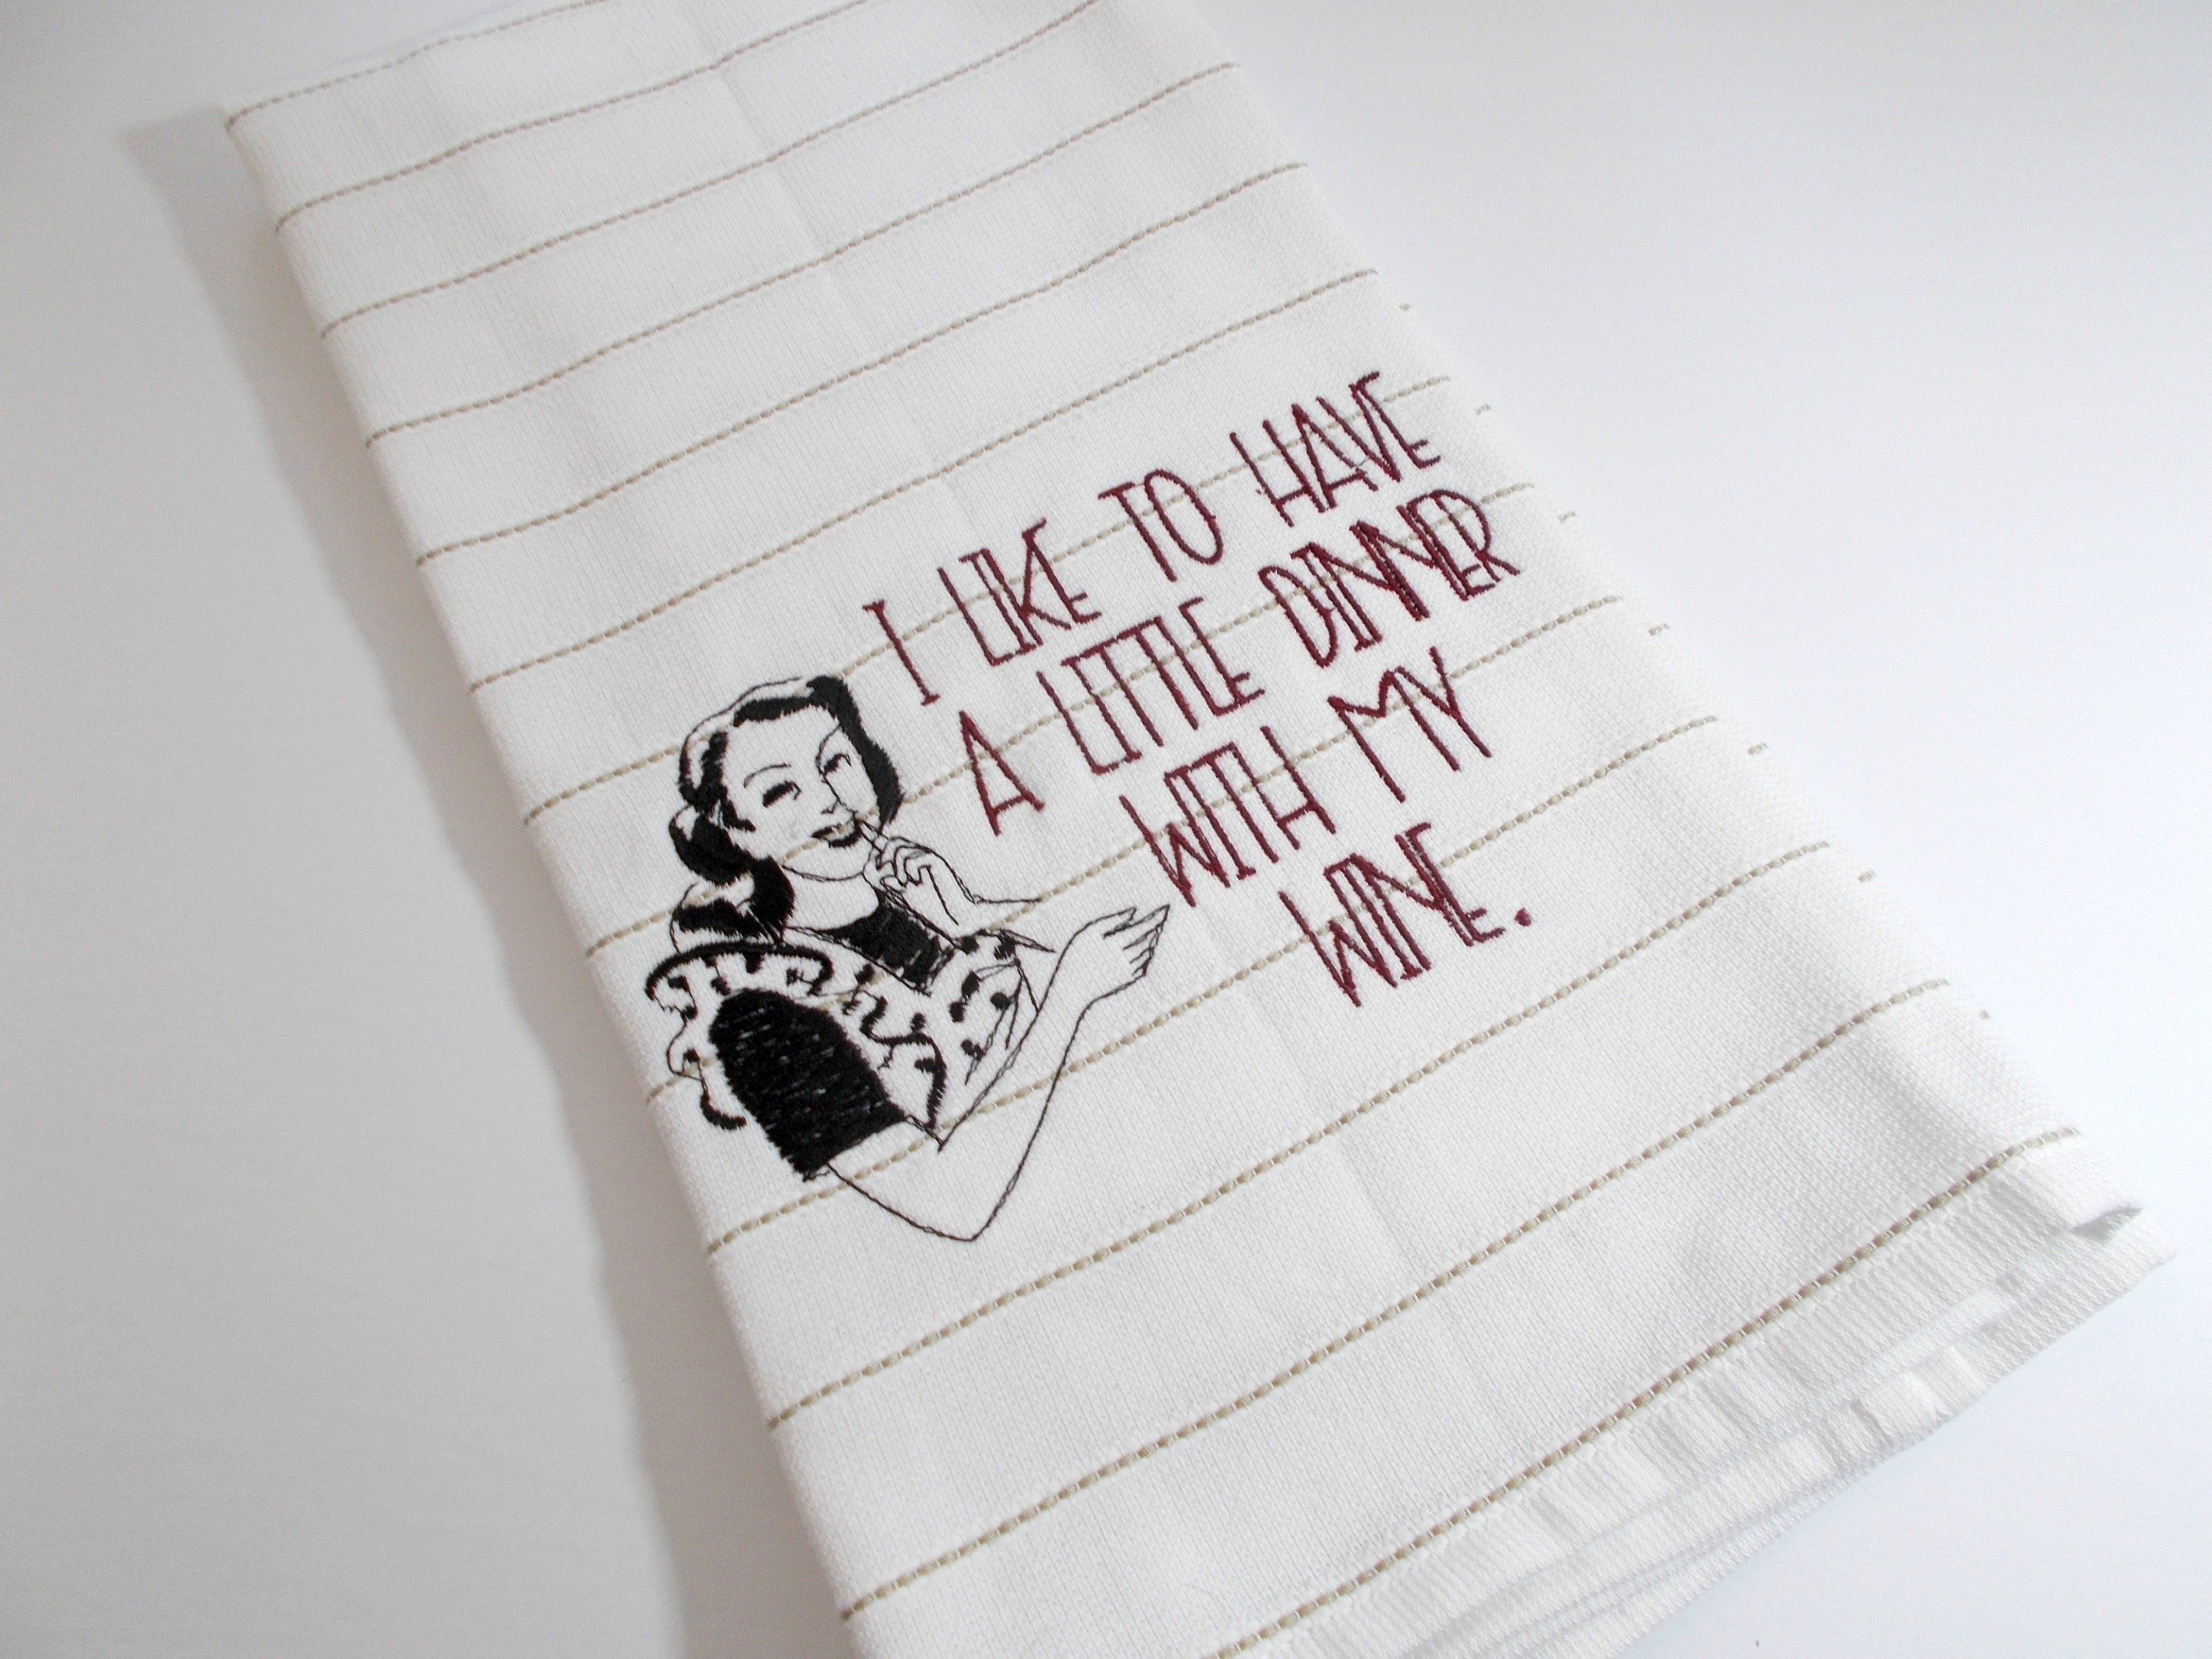 Funny Retro Housewife Towel, Funny Kitchen Towel, Sarcastic